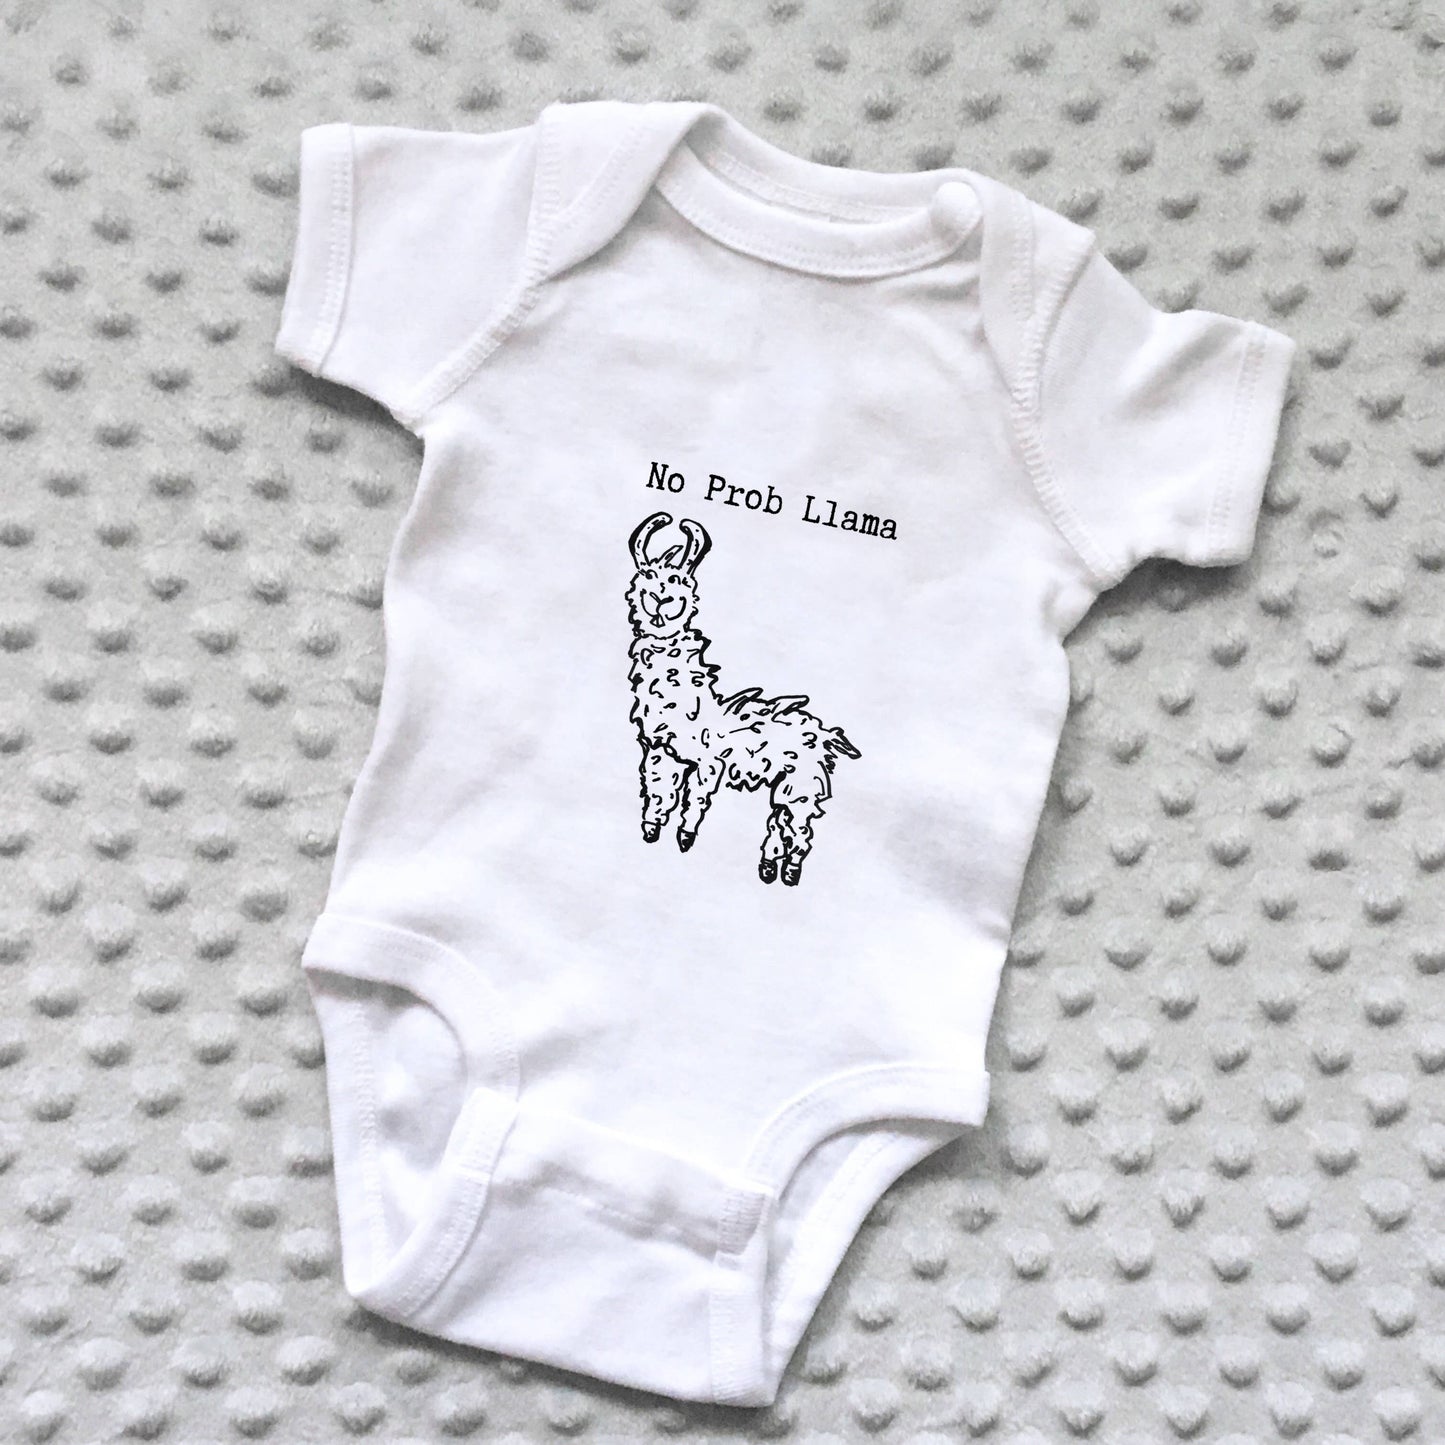 No Prob Llama - Baby Onesie by Things UnCommon